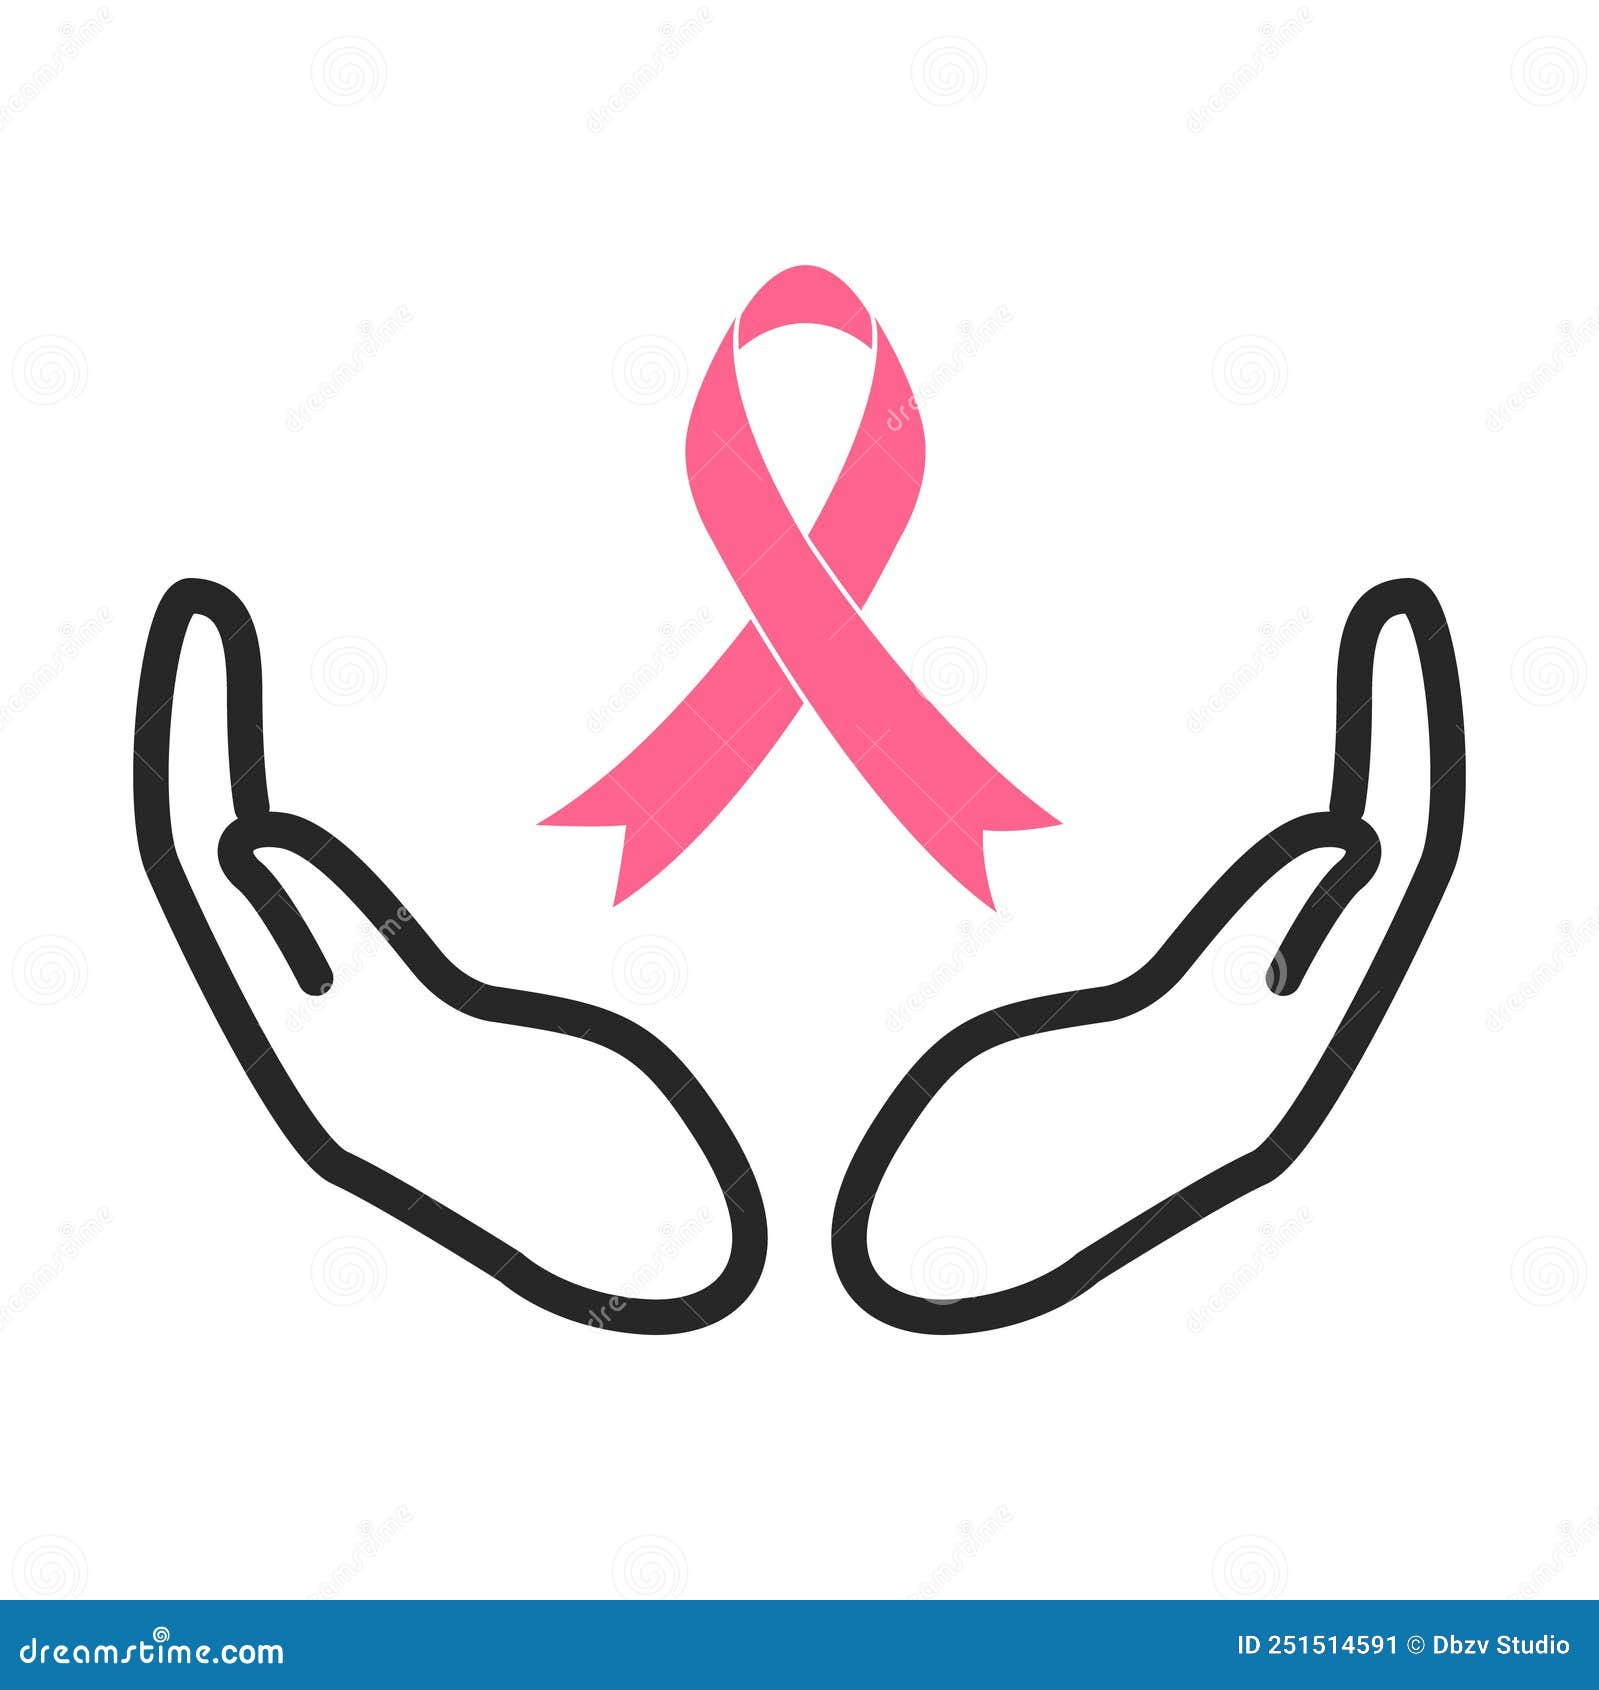 An upturned horseshoe painted pink with pink and white polka dot ribbon and  a heart shaped slate shape on a white table with pink background. Breast  cancer awareness message Stock Photo